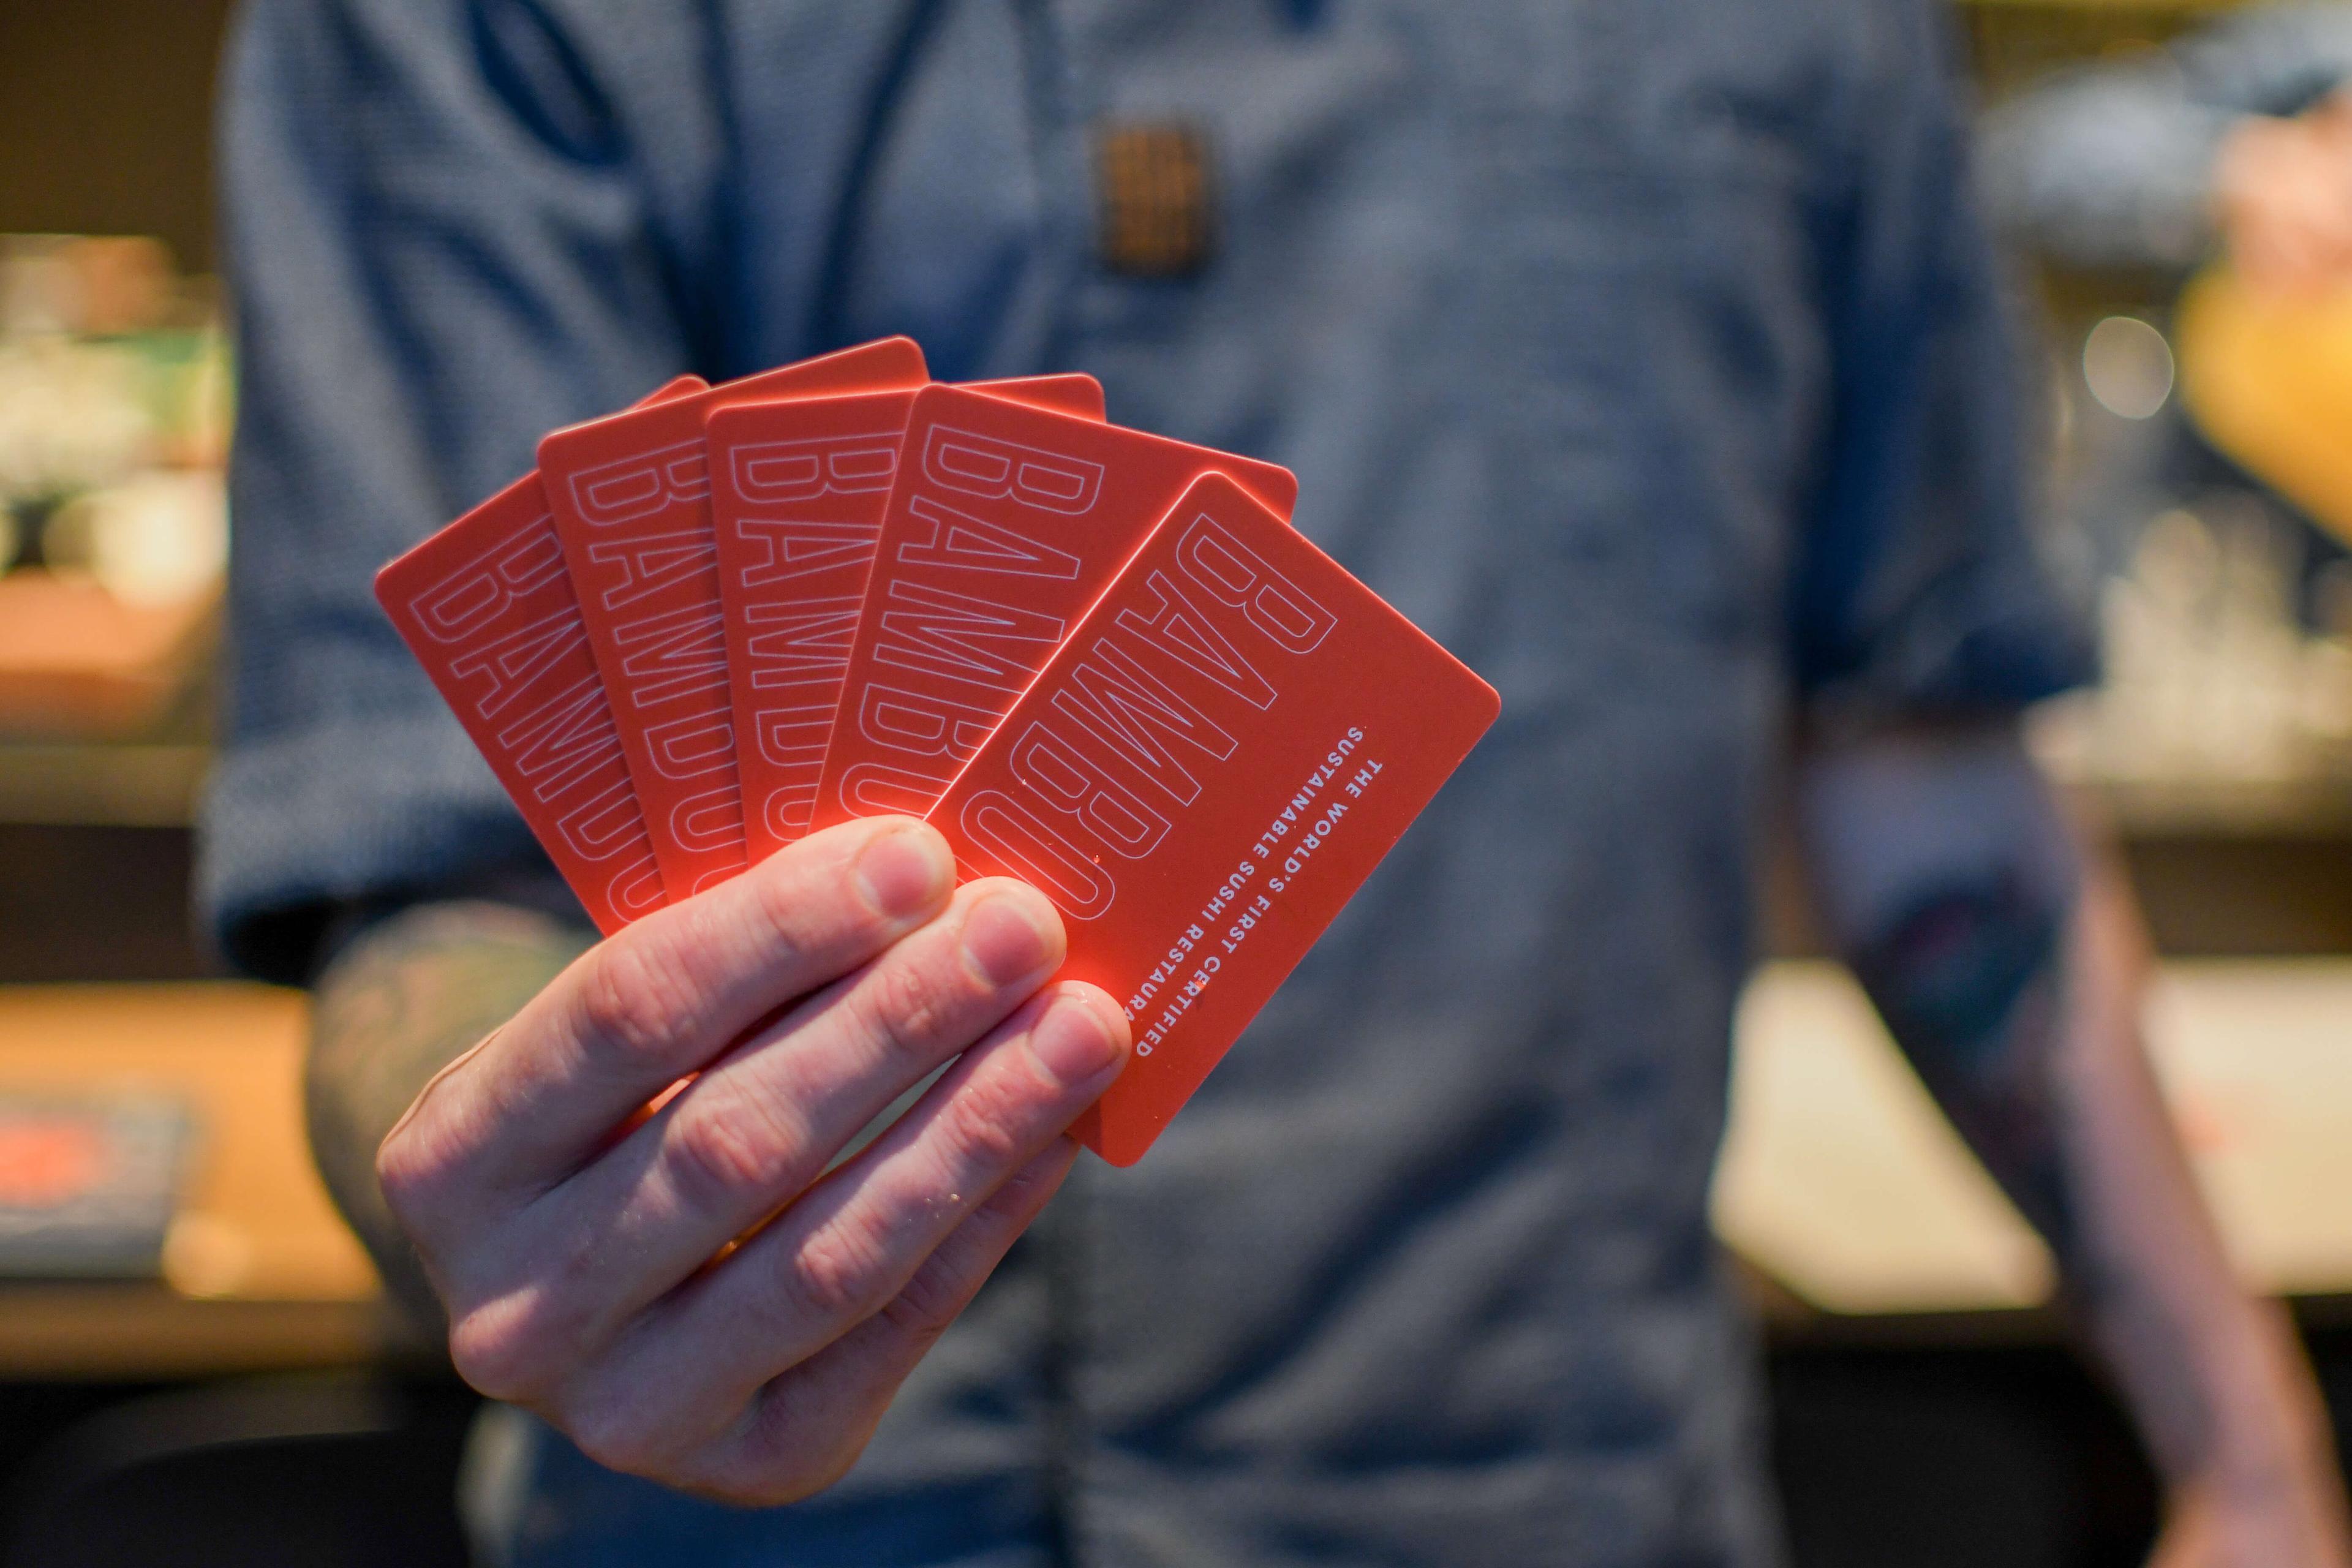 A person holding multiple Bamboo Sushi gift cards.